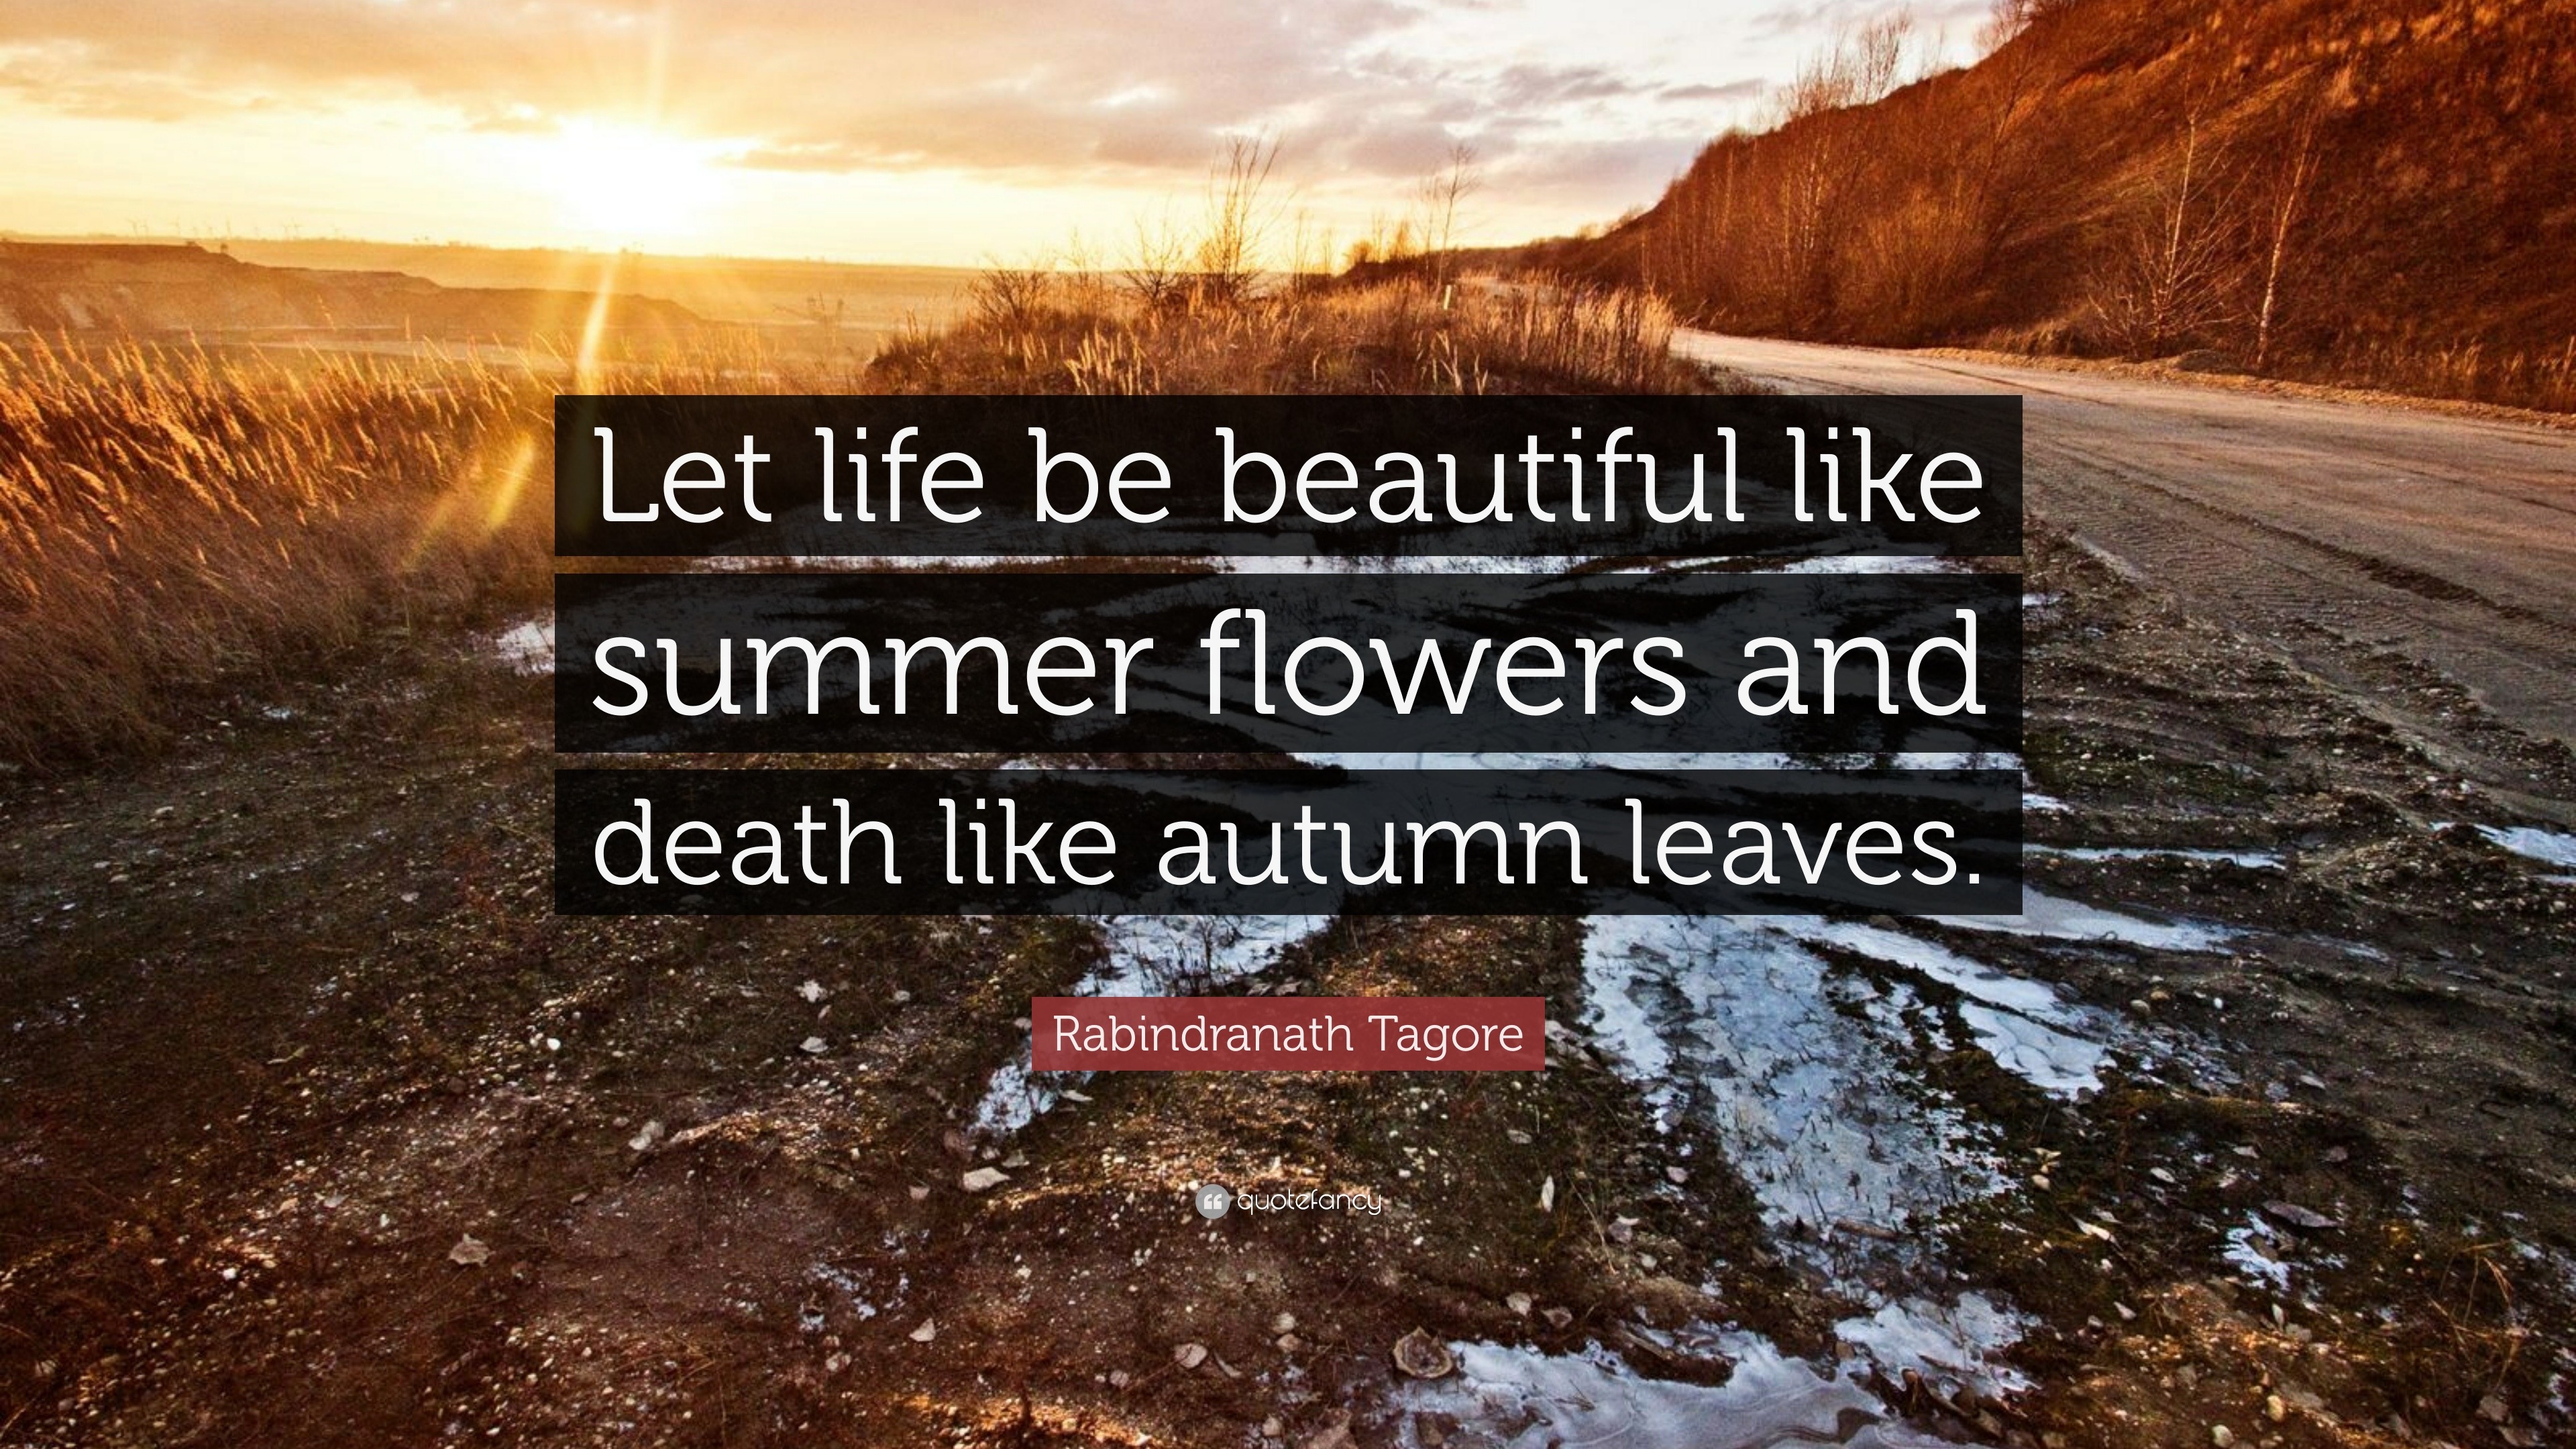 Rabindranath Tagore Quote “Let life be beautiful like summer flowers and like autumn